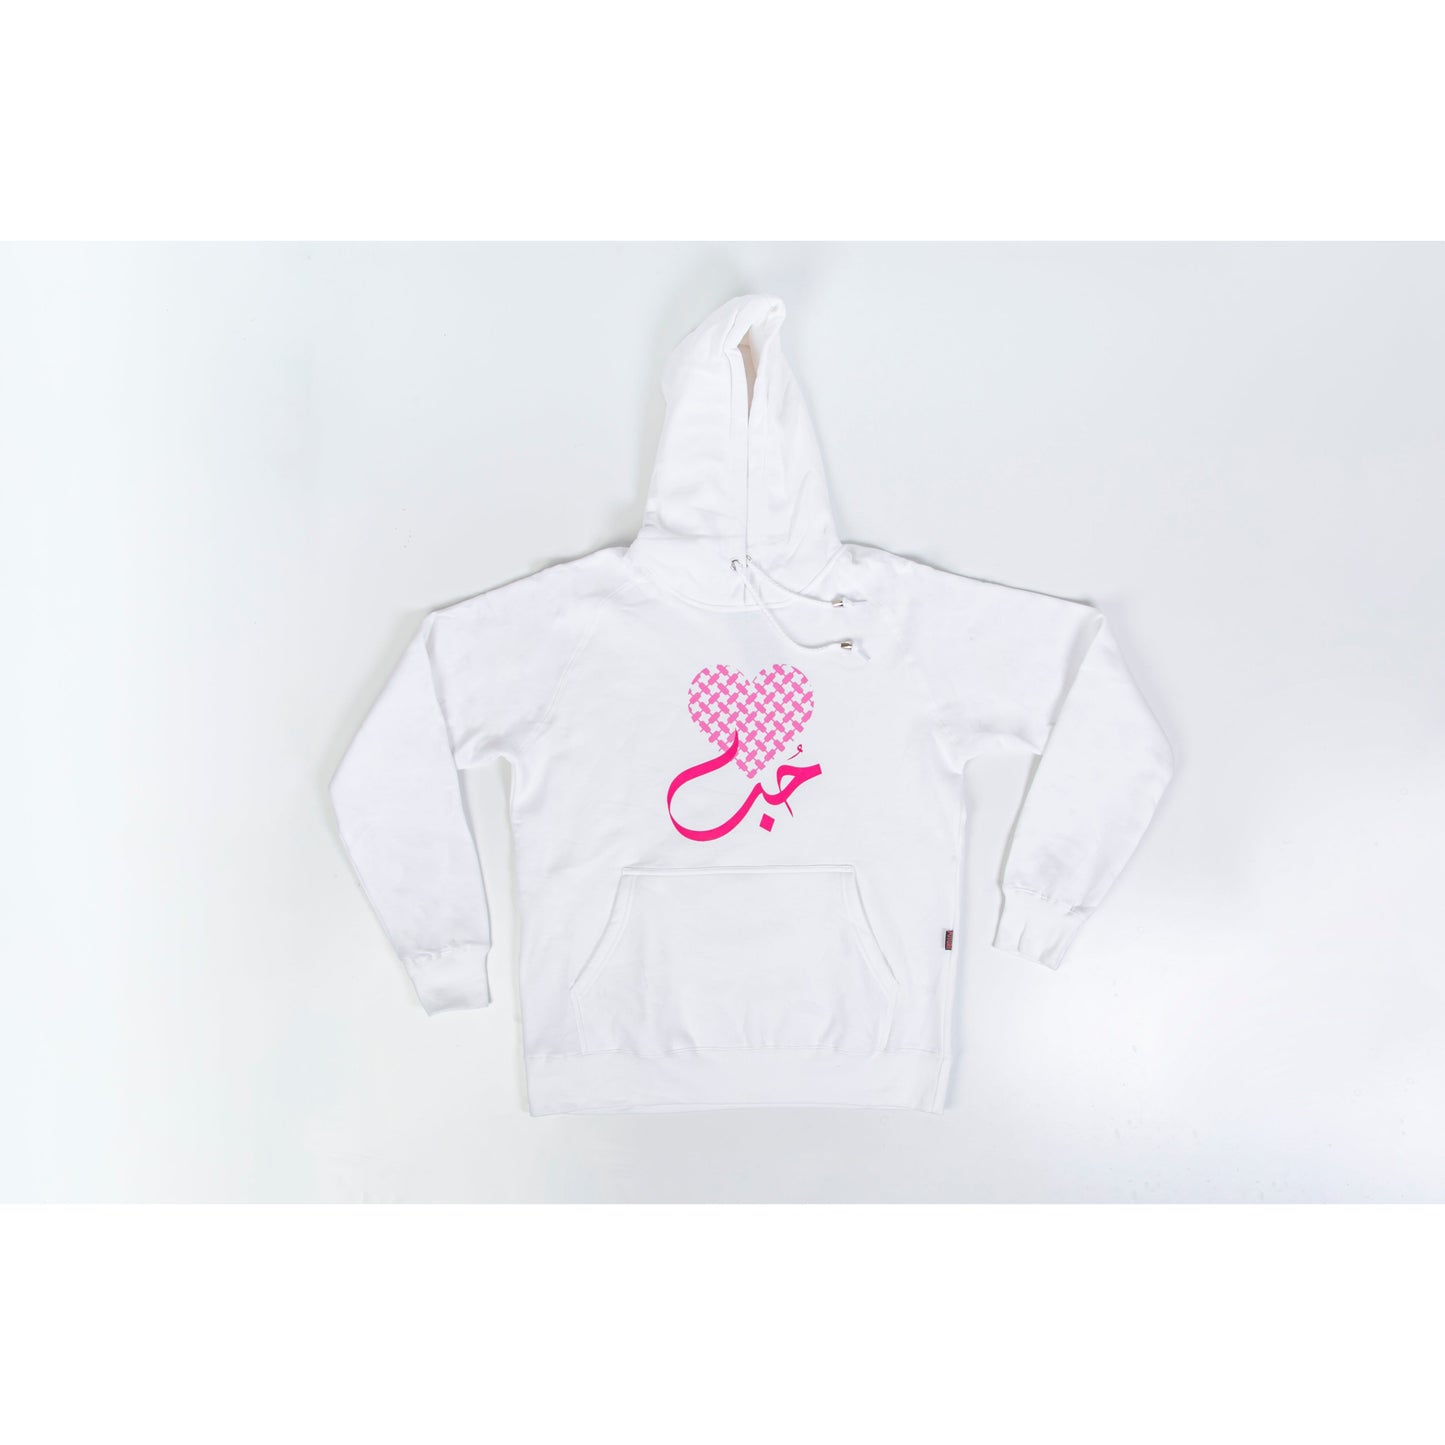 Hoodie in white color - Heart with word ­¨   - Breast cancer